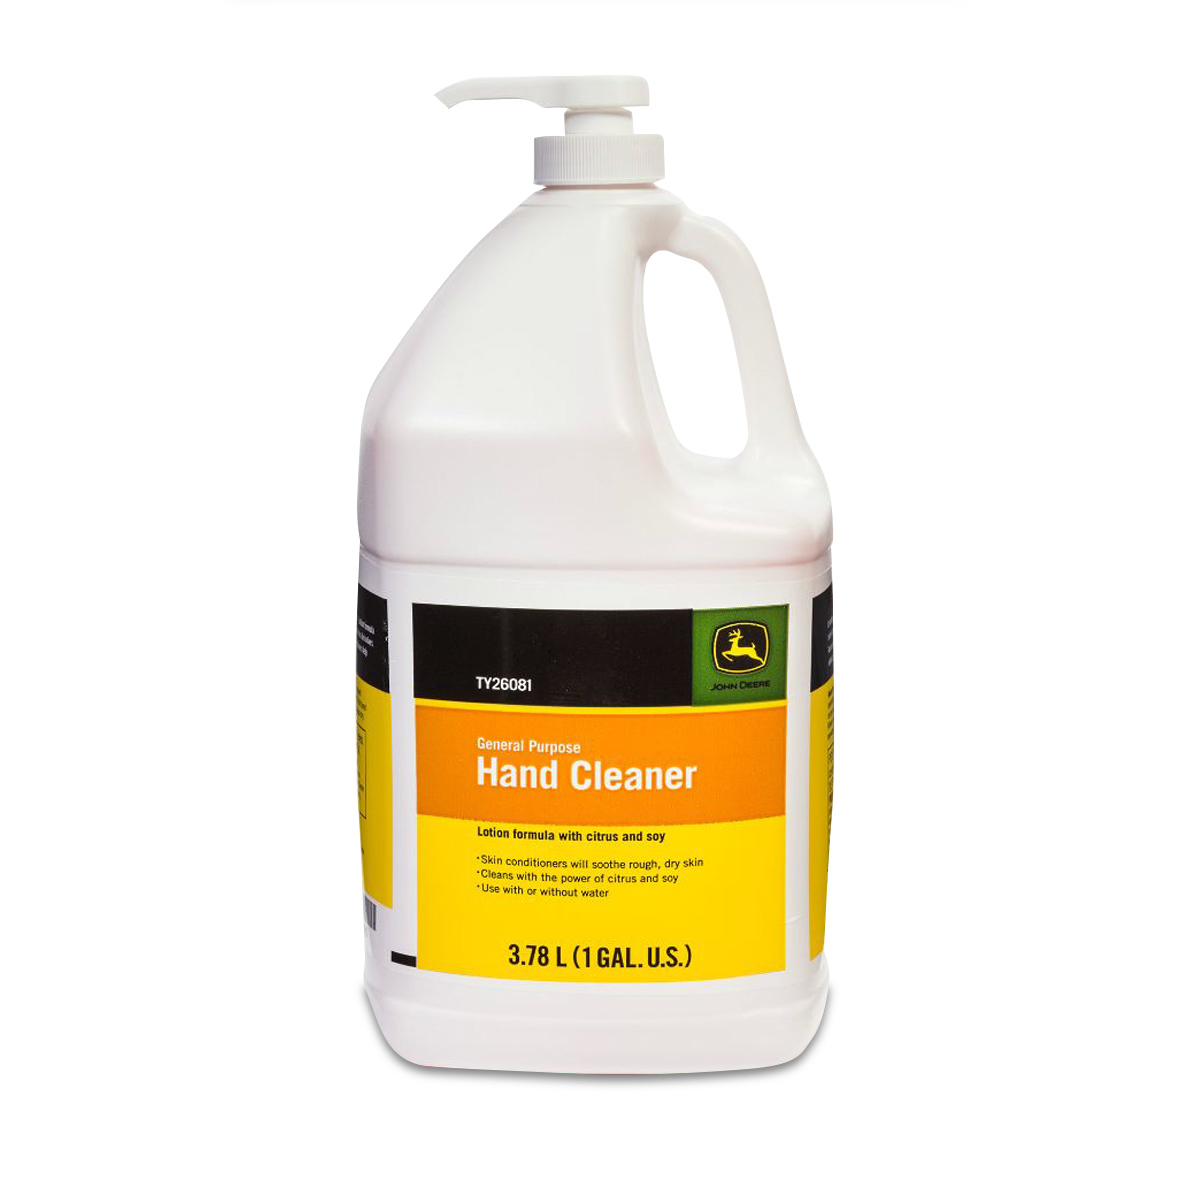 Hand Cleaner with Citrus and Soy, 1 GAL